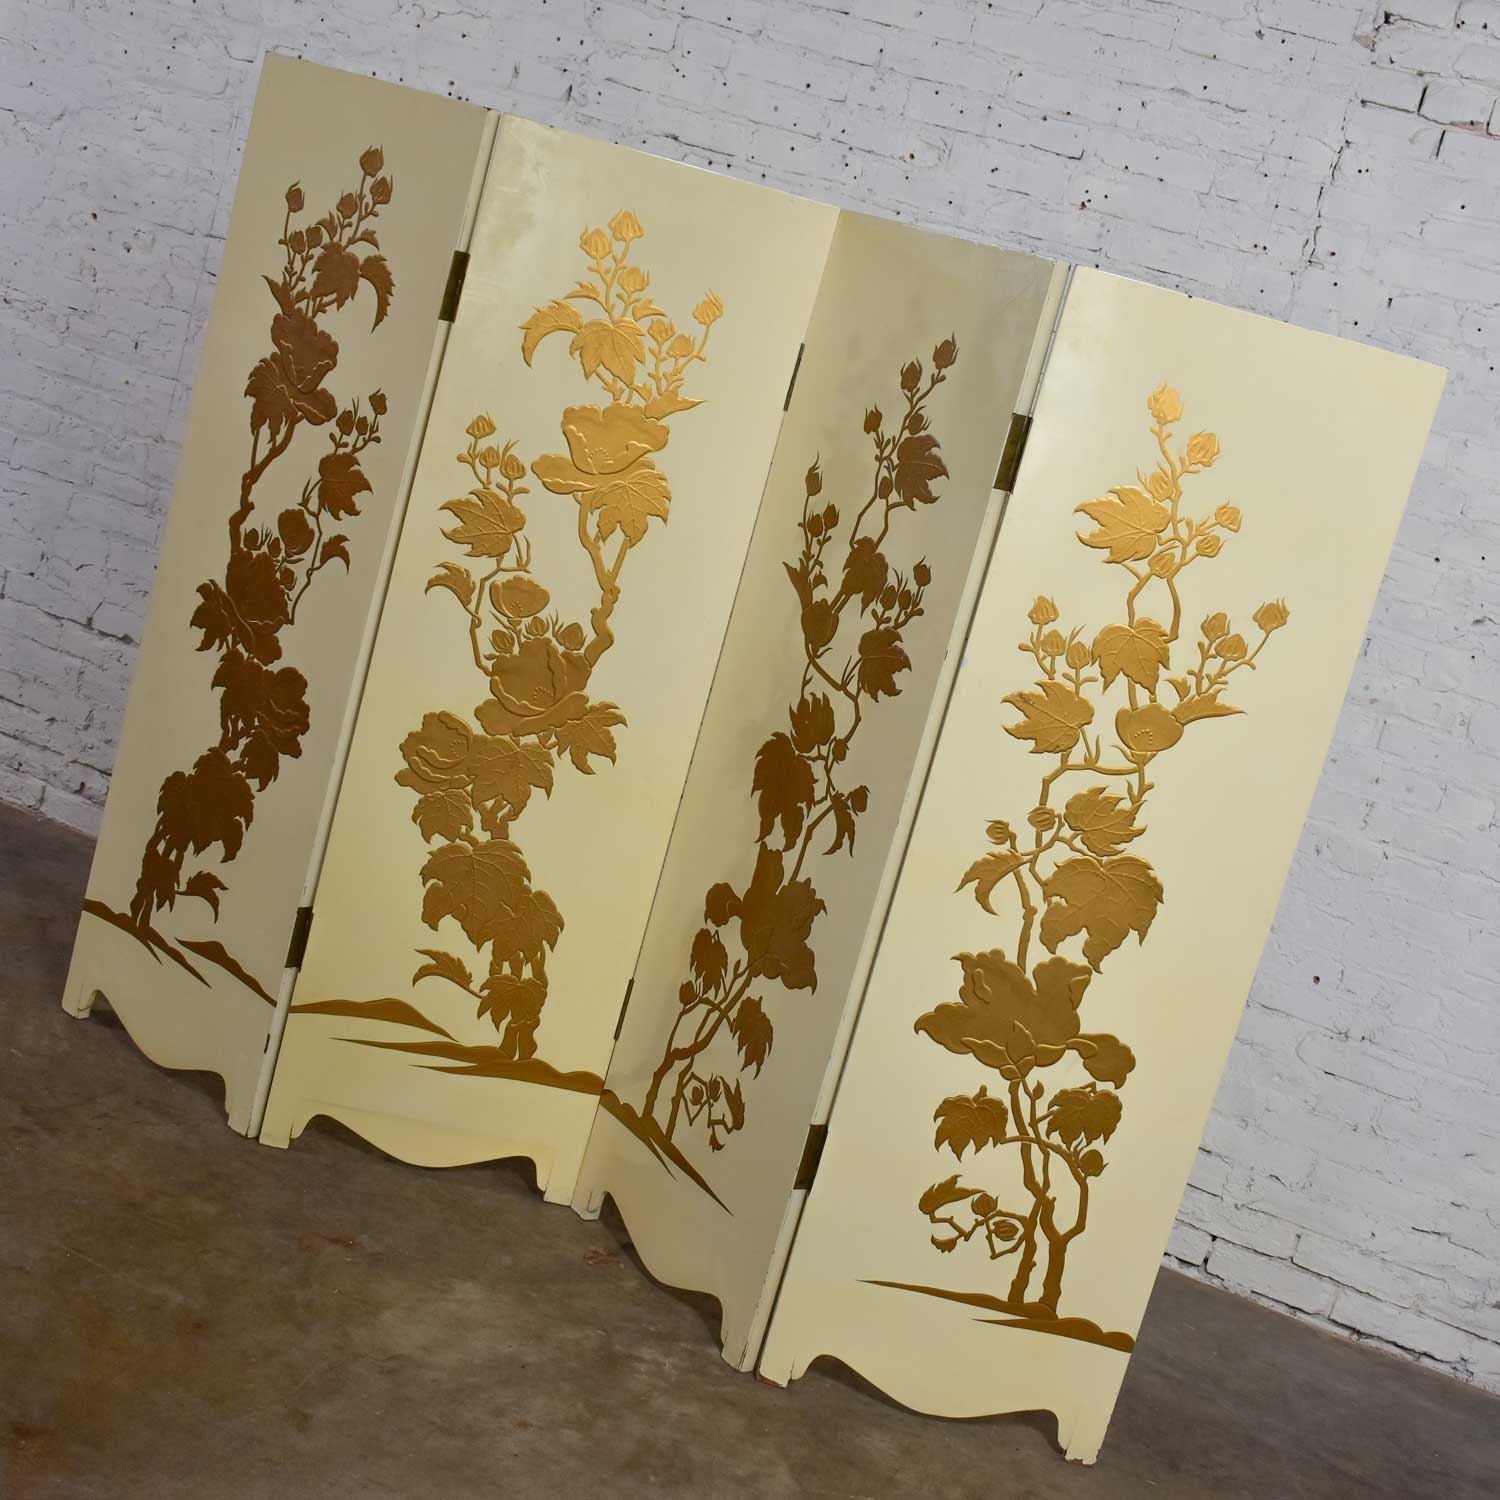 Painted Off White Hollywood Regency BoHo Chic Four Panel Folding Screen with Floral Embossed Design